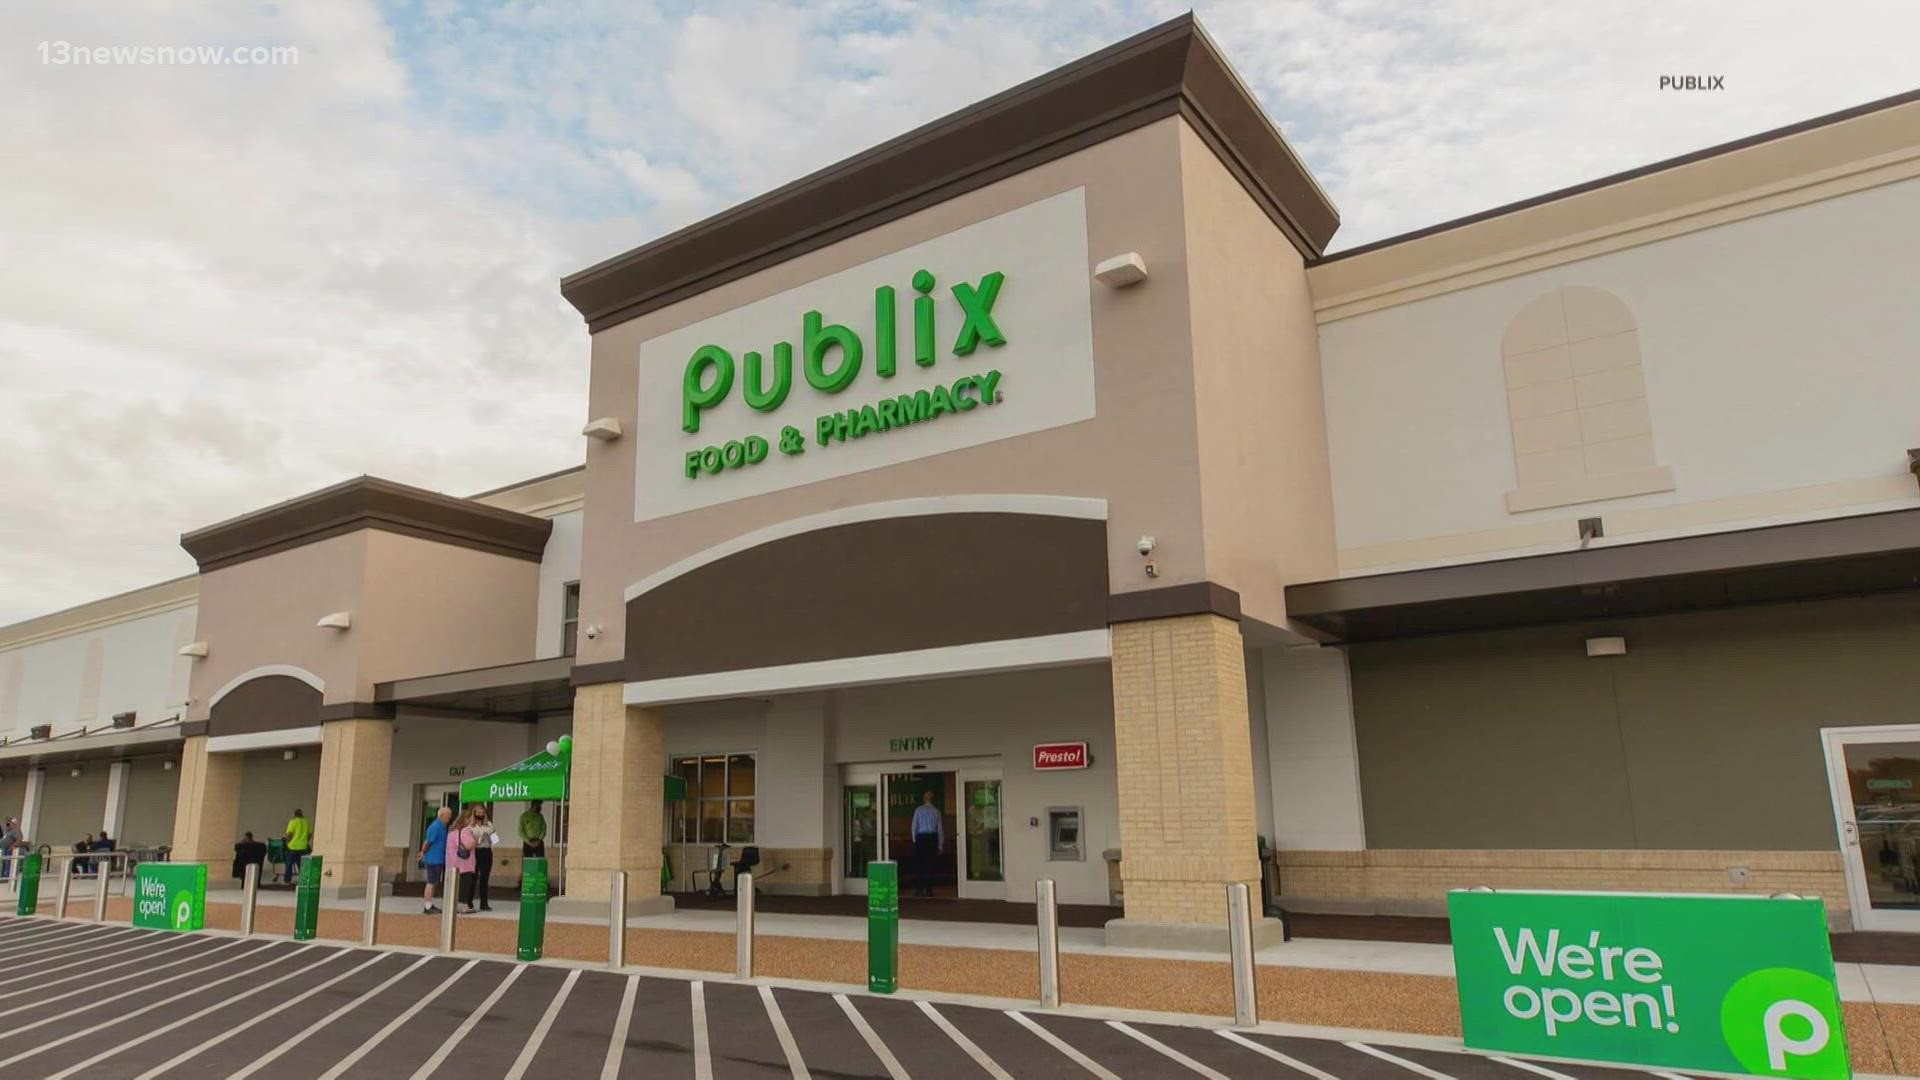 Publix grocery store could soon be coming to the City of Norfolk